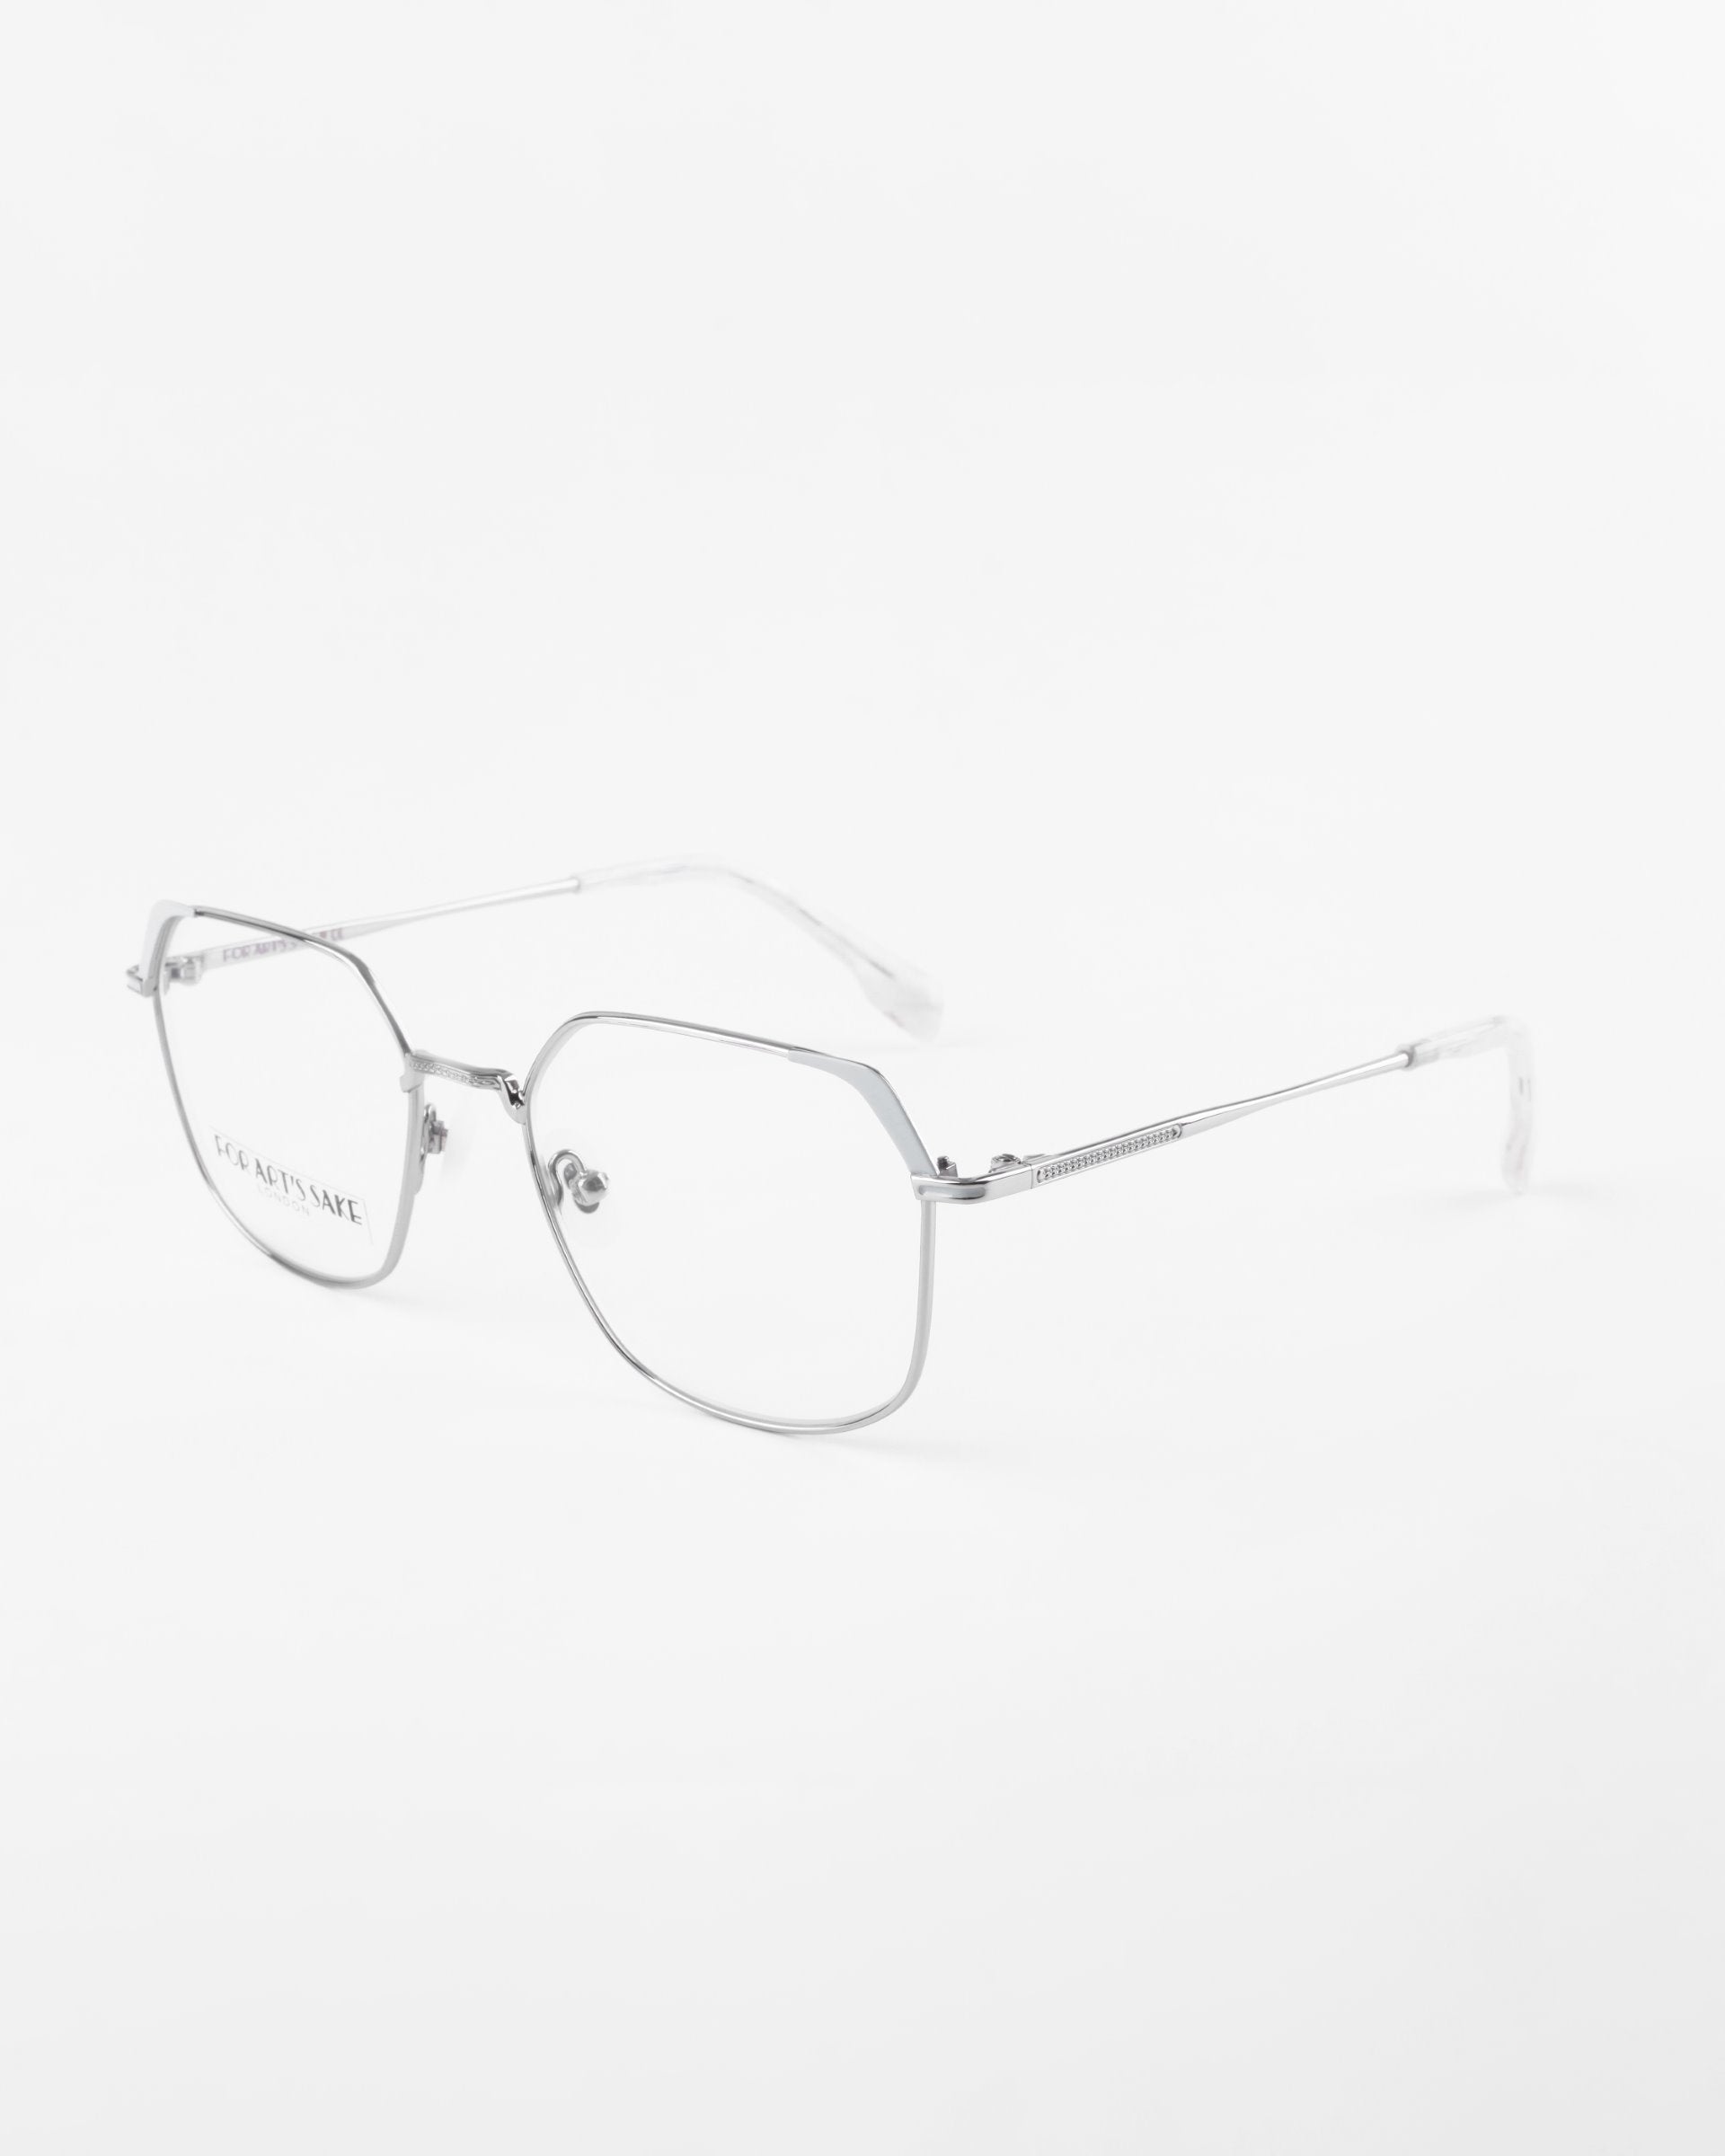 **For Art&#39;s Sake® Godiva:**

A pair of sleek, silver metal glasses with a minimalist design. The frames are thin and angular, featuring a slight geometric shape. Equipped with prescription lenses, the arms are straight with a subtle hinge near the lenses, and the nose pads are clear. The background is plain white.


